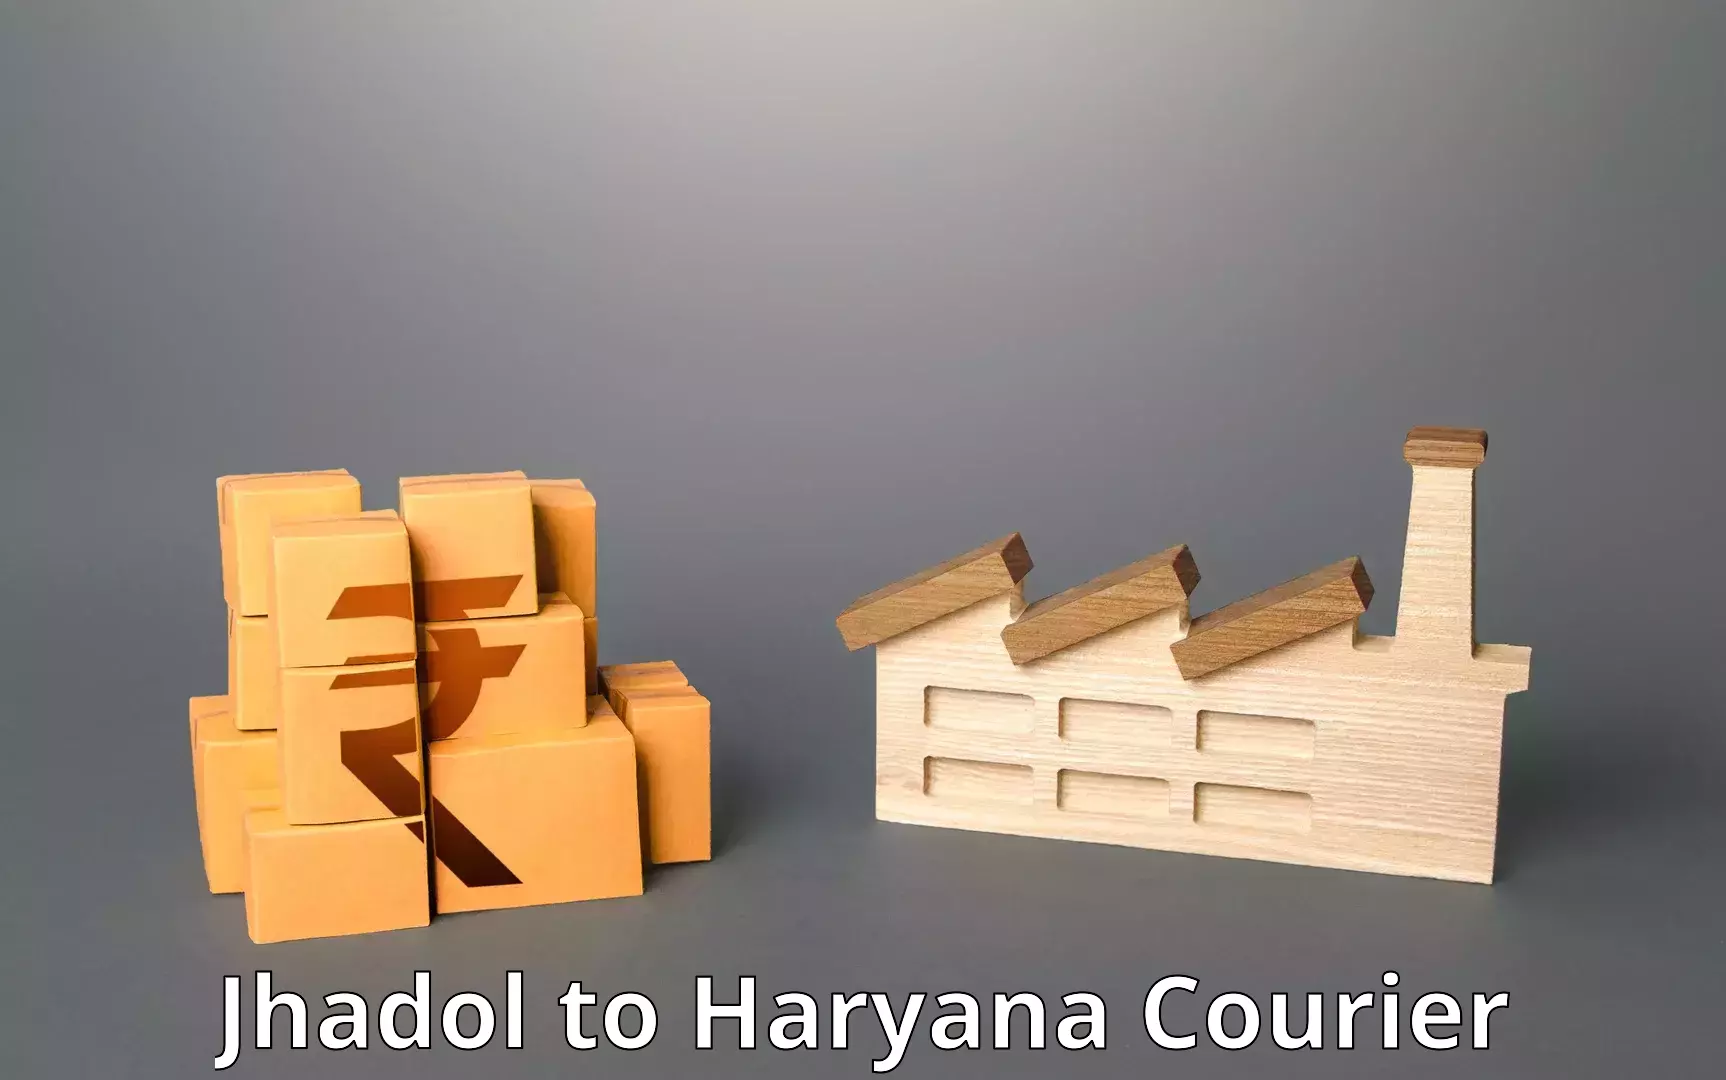 Special handling courier Jhadol to Chaudhary Charan Singh Haryana Agricultural University Hisar